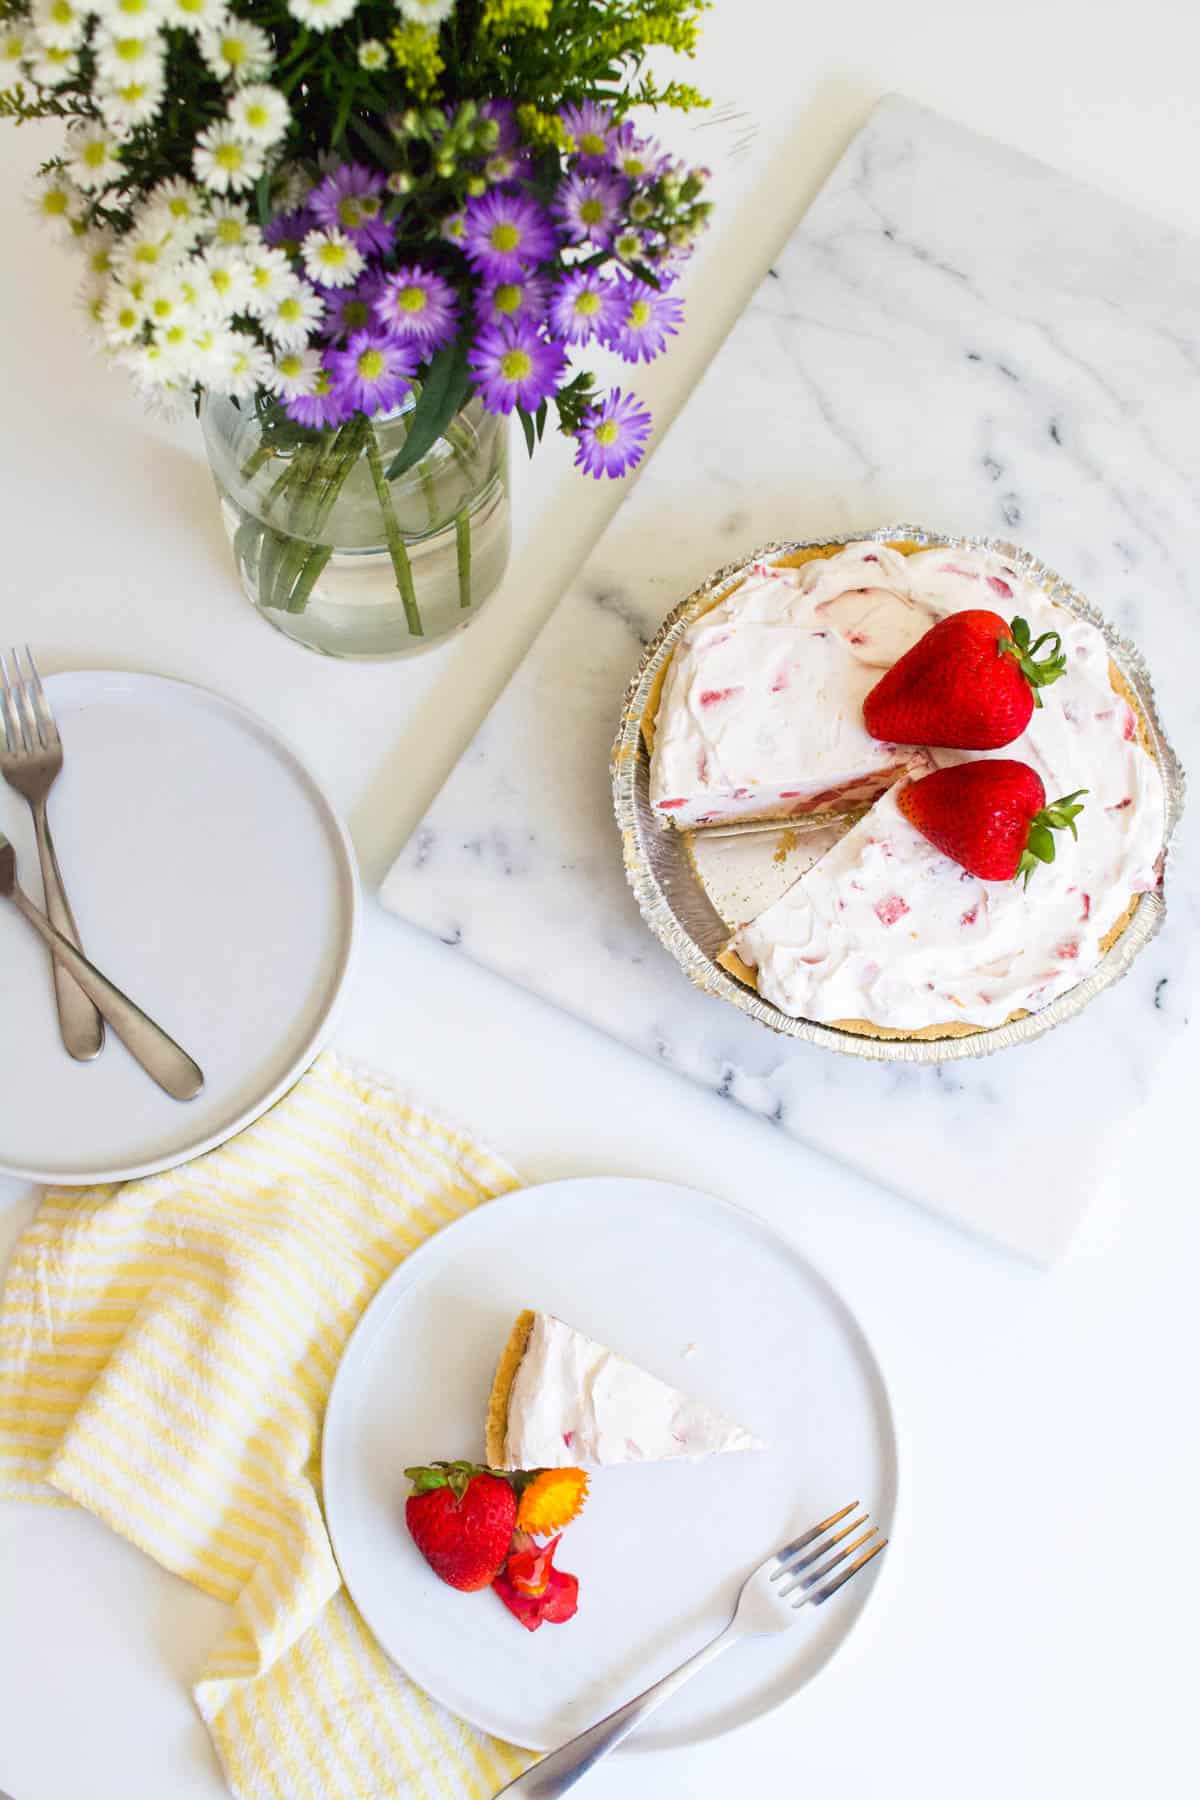 Strawberry Yogurt Pie Recipe with a piece of pie cut out and served on a plate next to it.